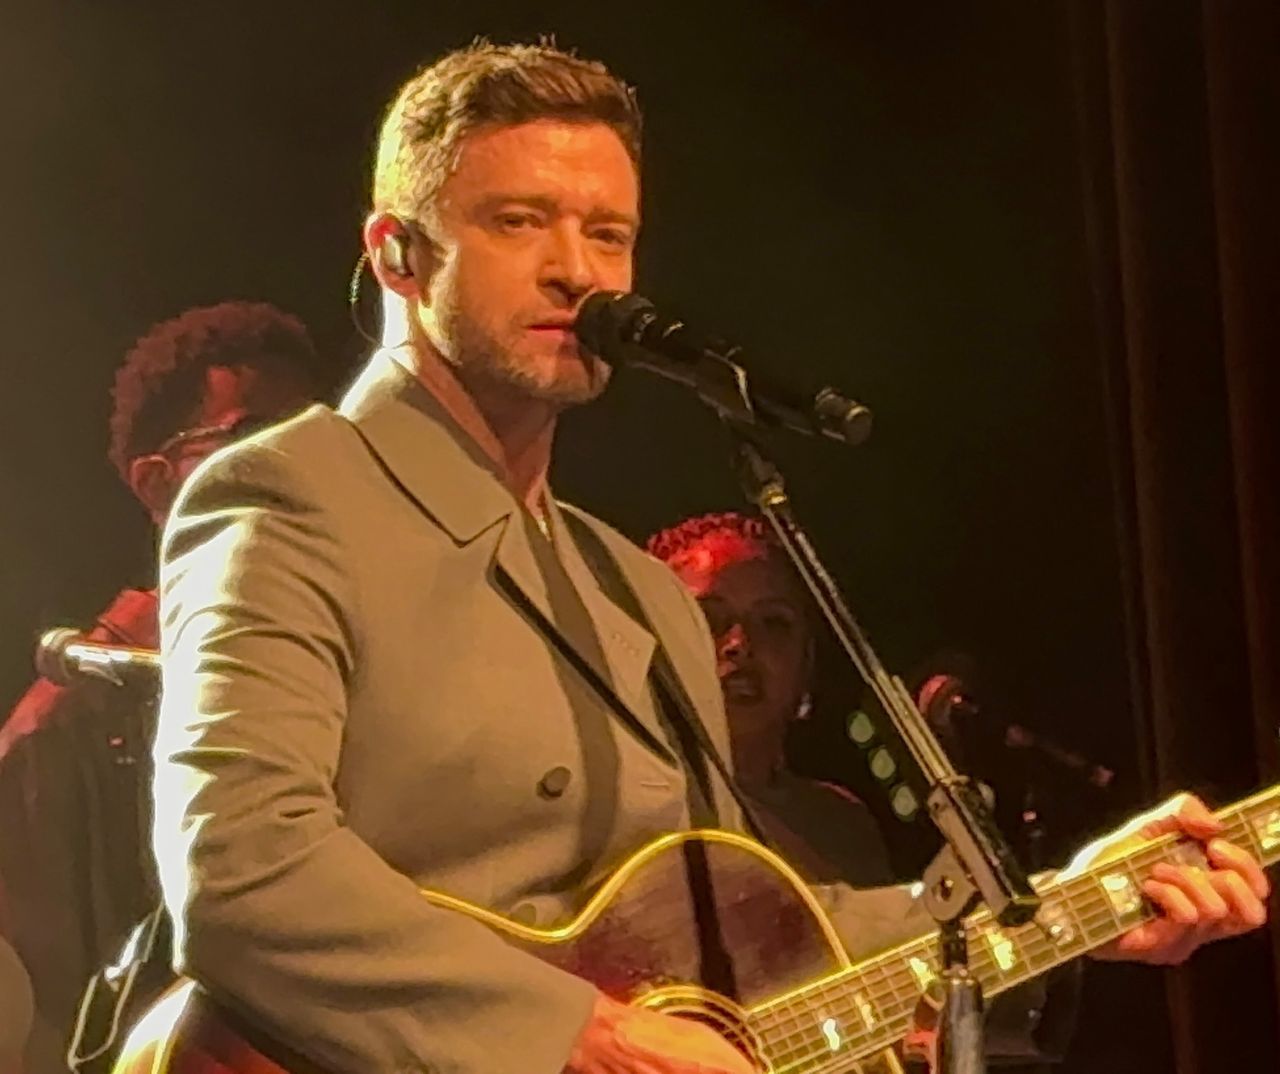 Justin Timberlake at a concert in Irving Plaza in New York